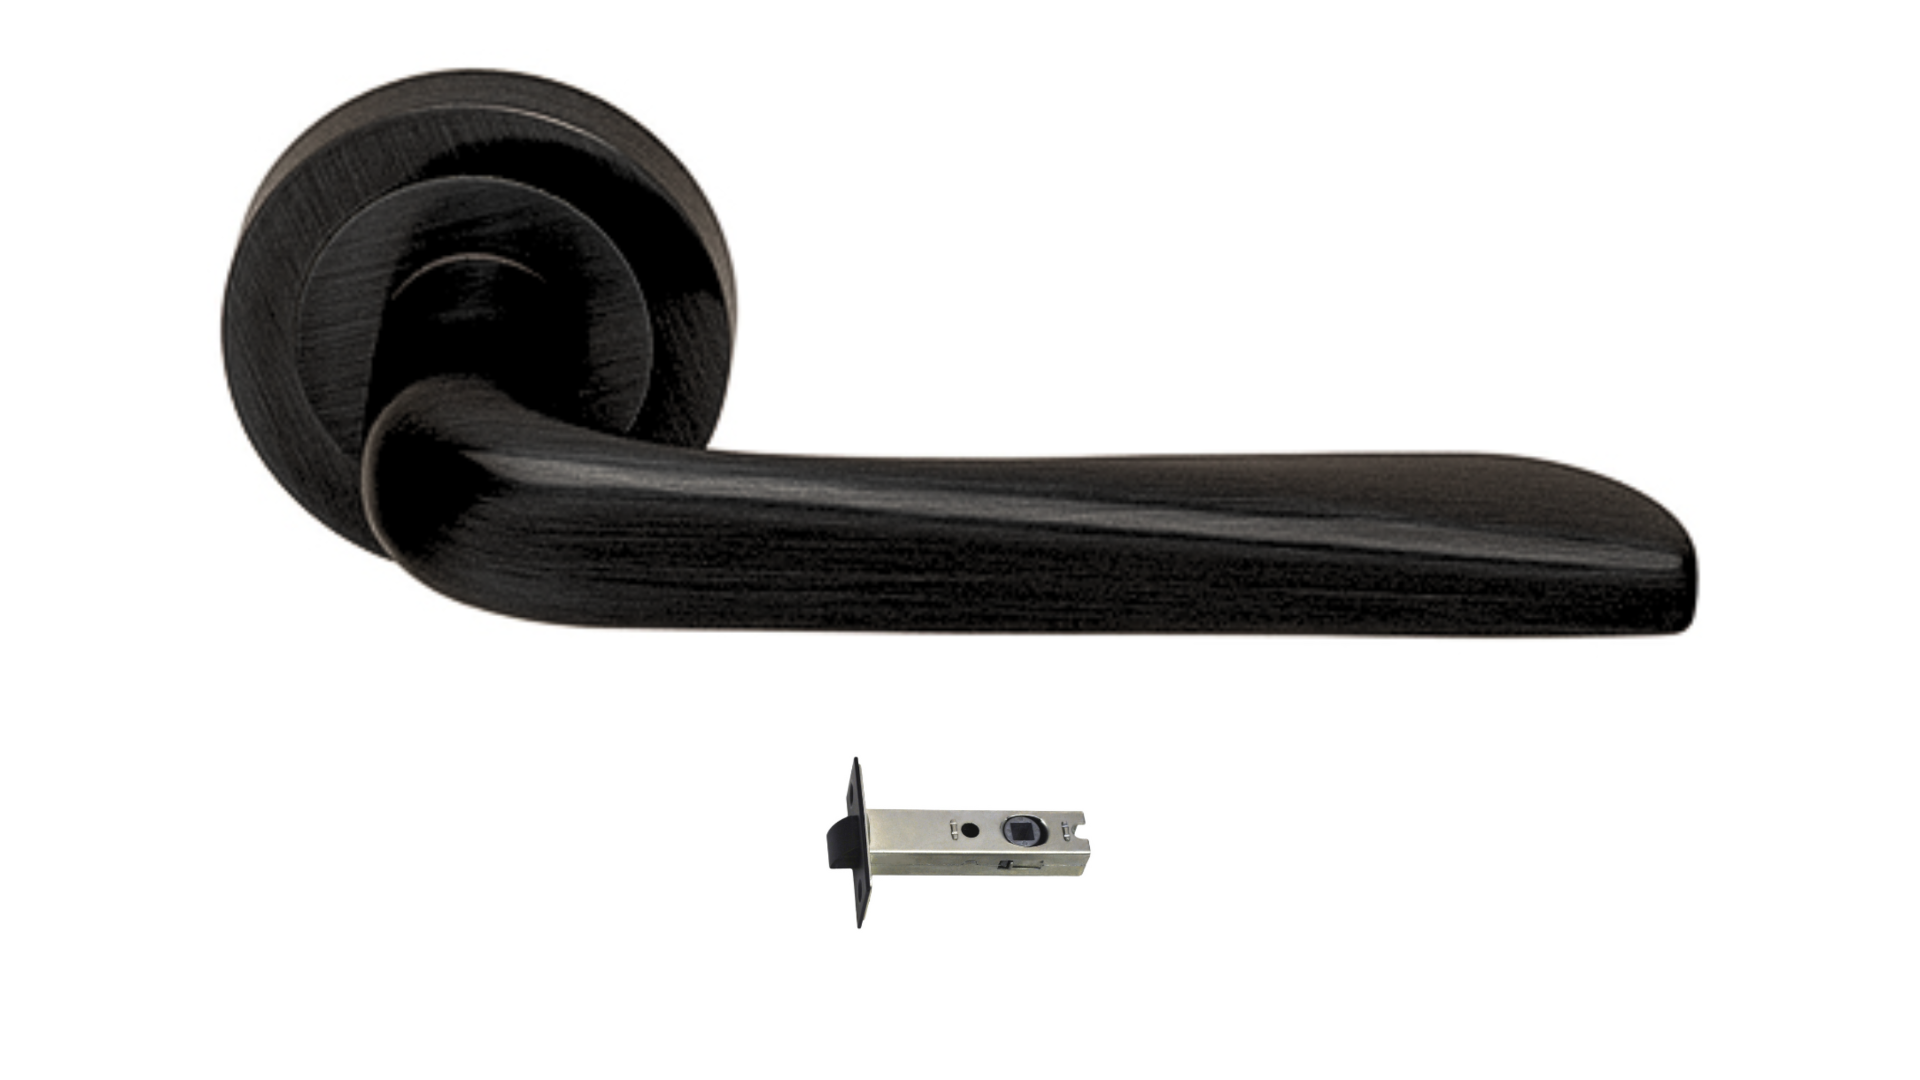 Product picture of the Petra Matt Black Door Handle with separate privacy tubular latch on a white background.